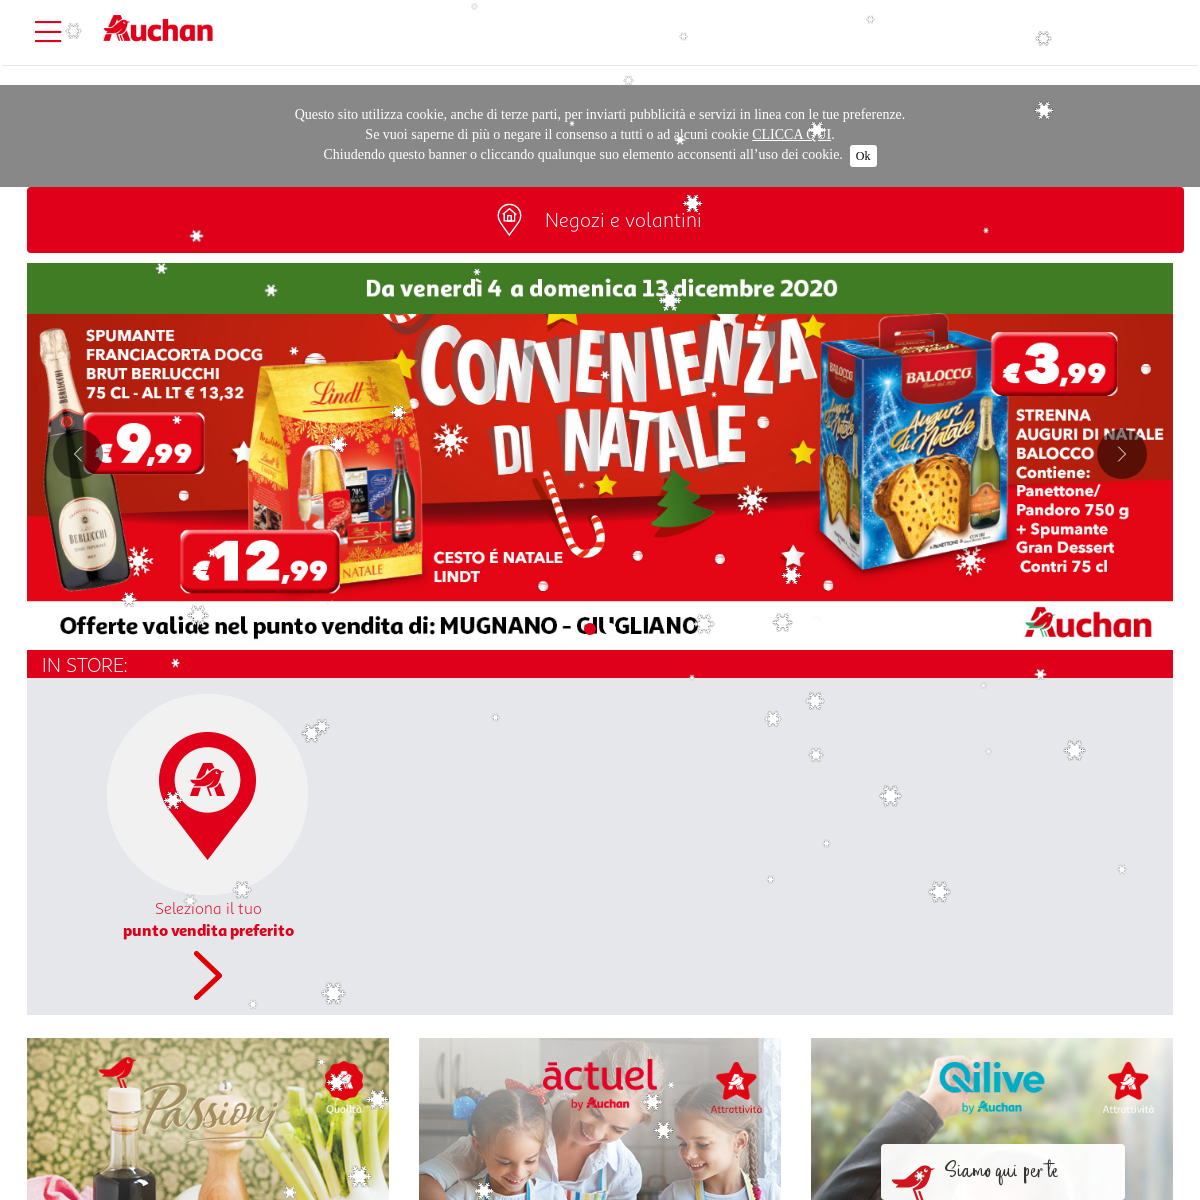 A complete backup of auchan.it